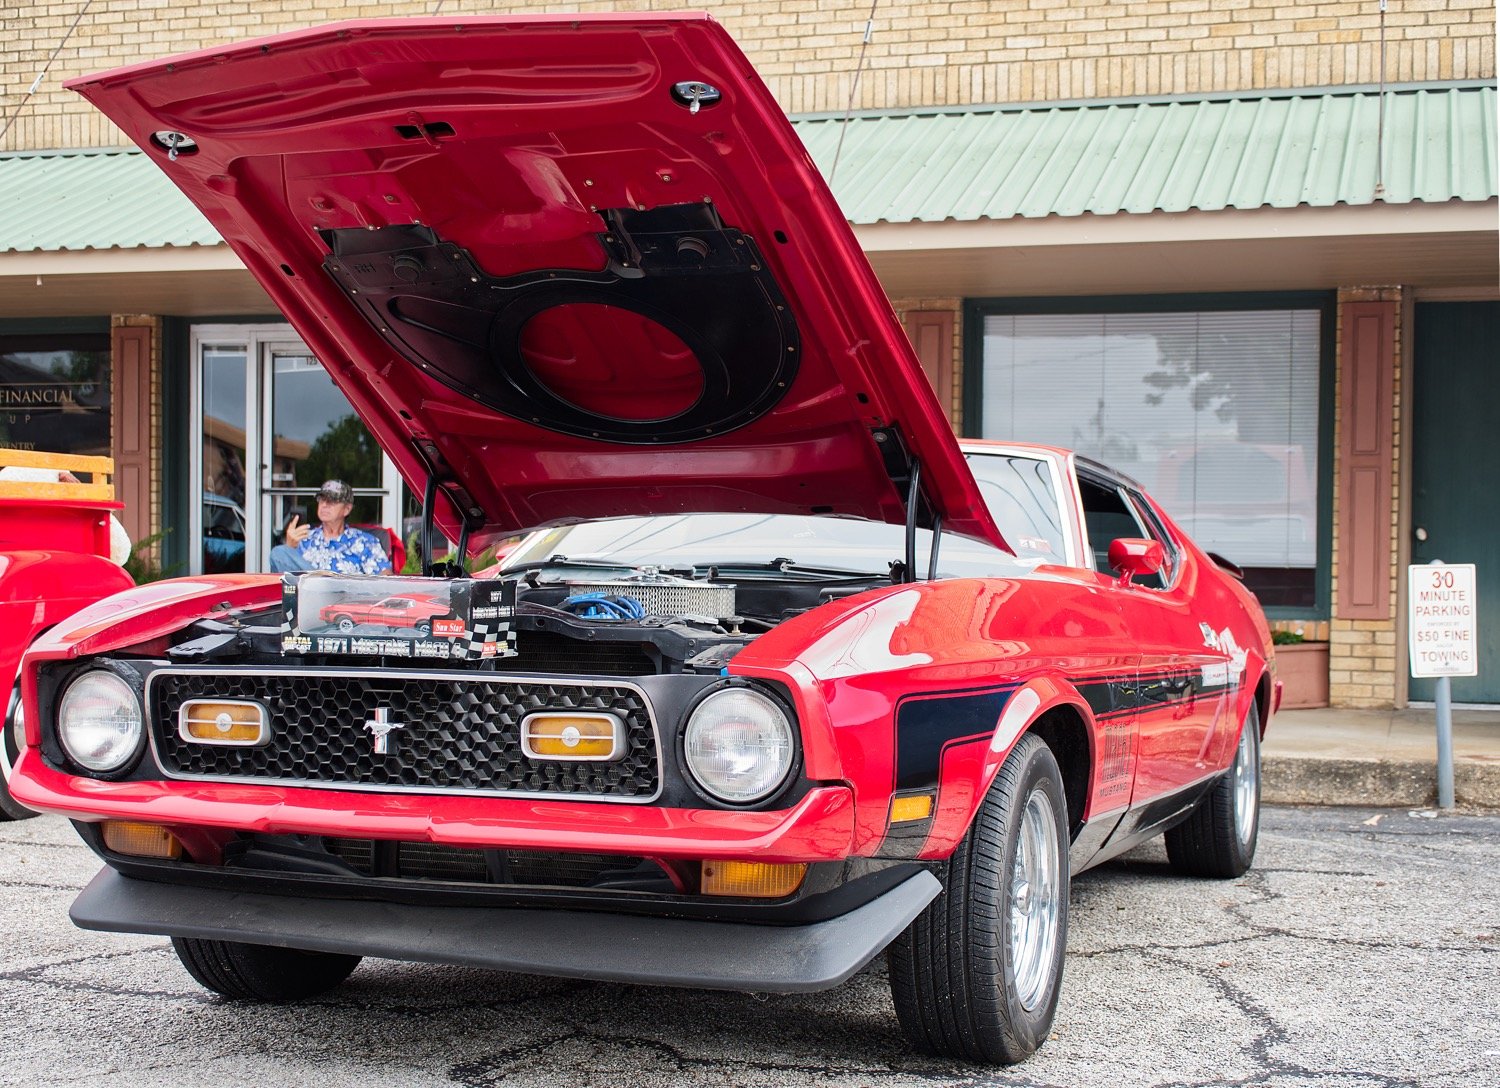 Among the various Ford models was this 1971 Mustang Mach 1, along with its miniature scaled down replica.